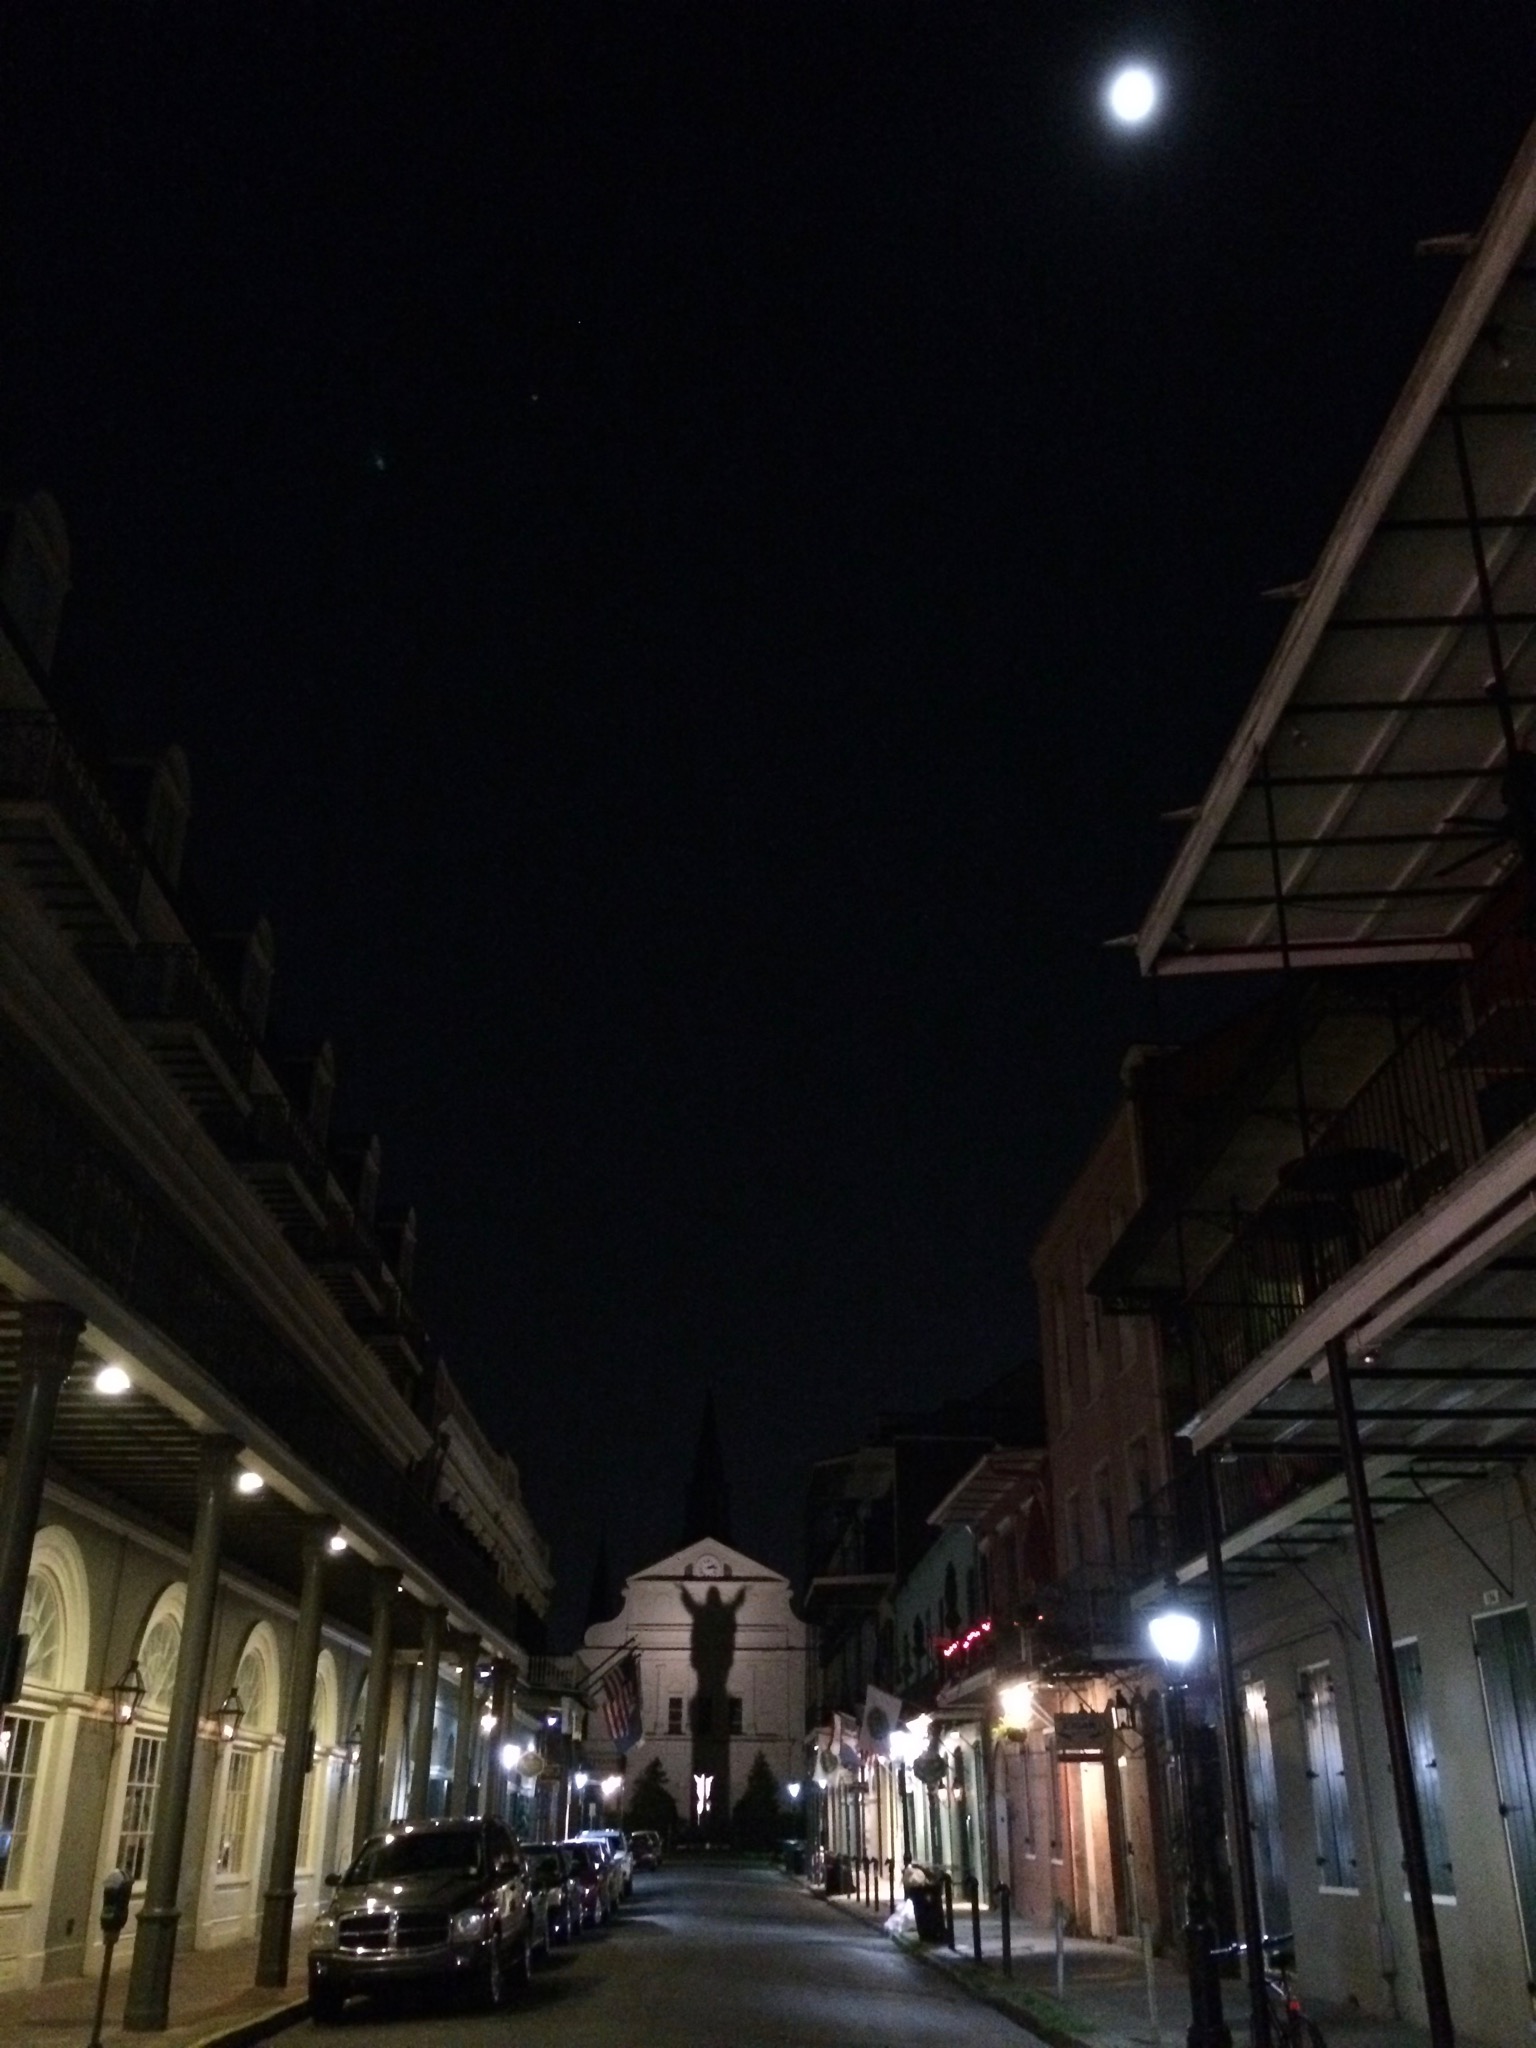 Photo 50 of 56 from the album Highlights New Orleans 2015.